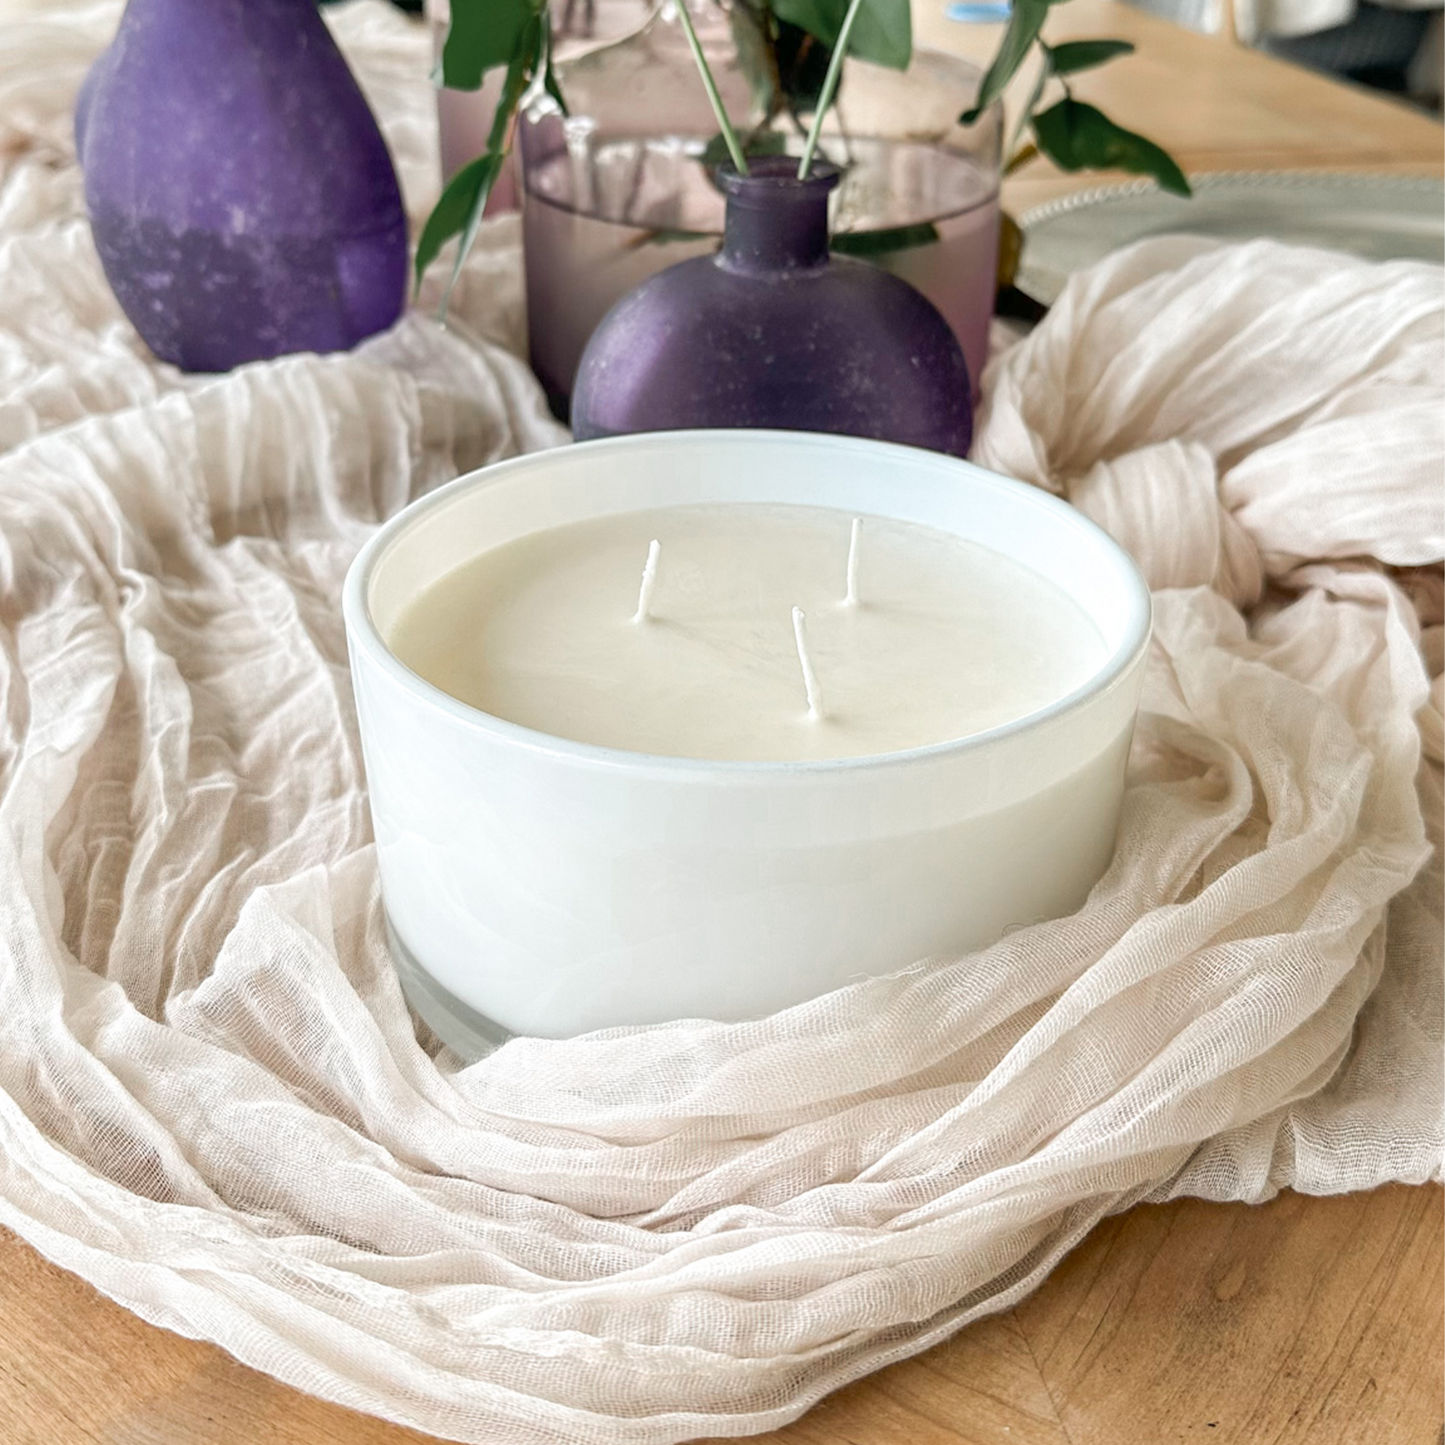 Candle Bowls 100% Soy Wax 3 Wick Candle Bowls – Hand Poured, Paraffin Free, Non-Toxic